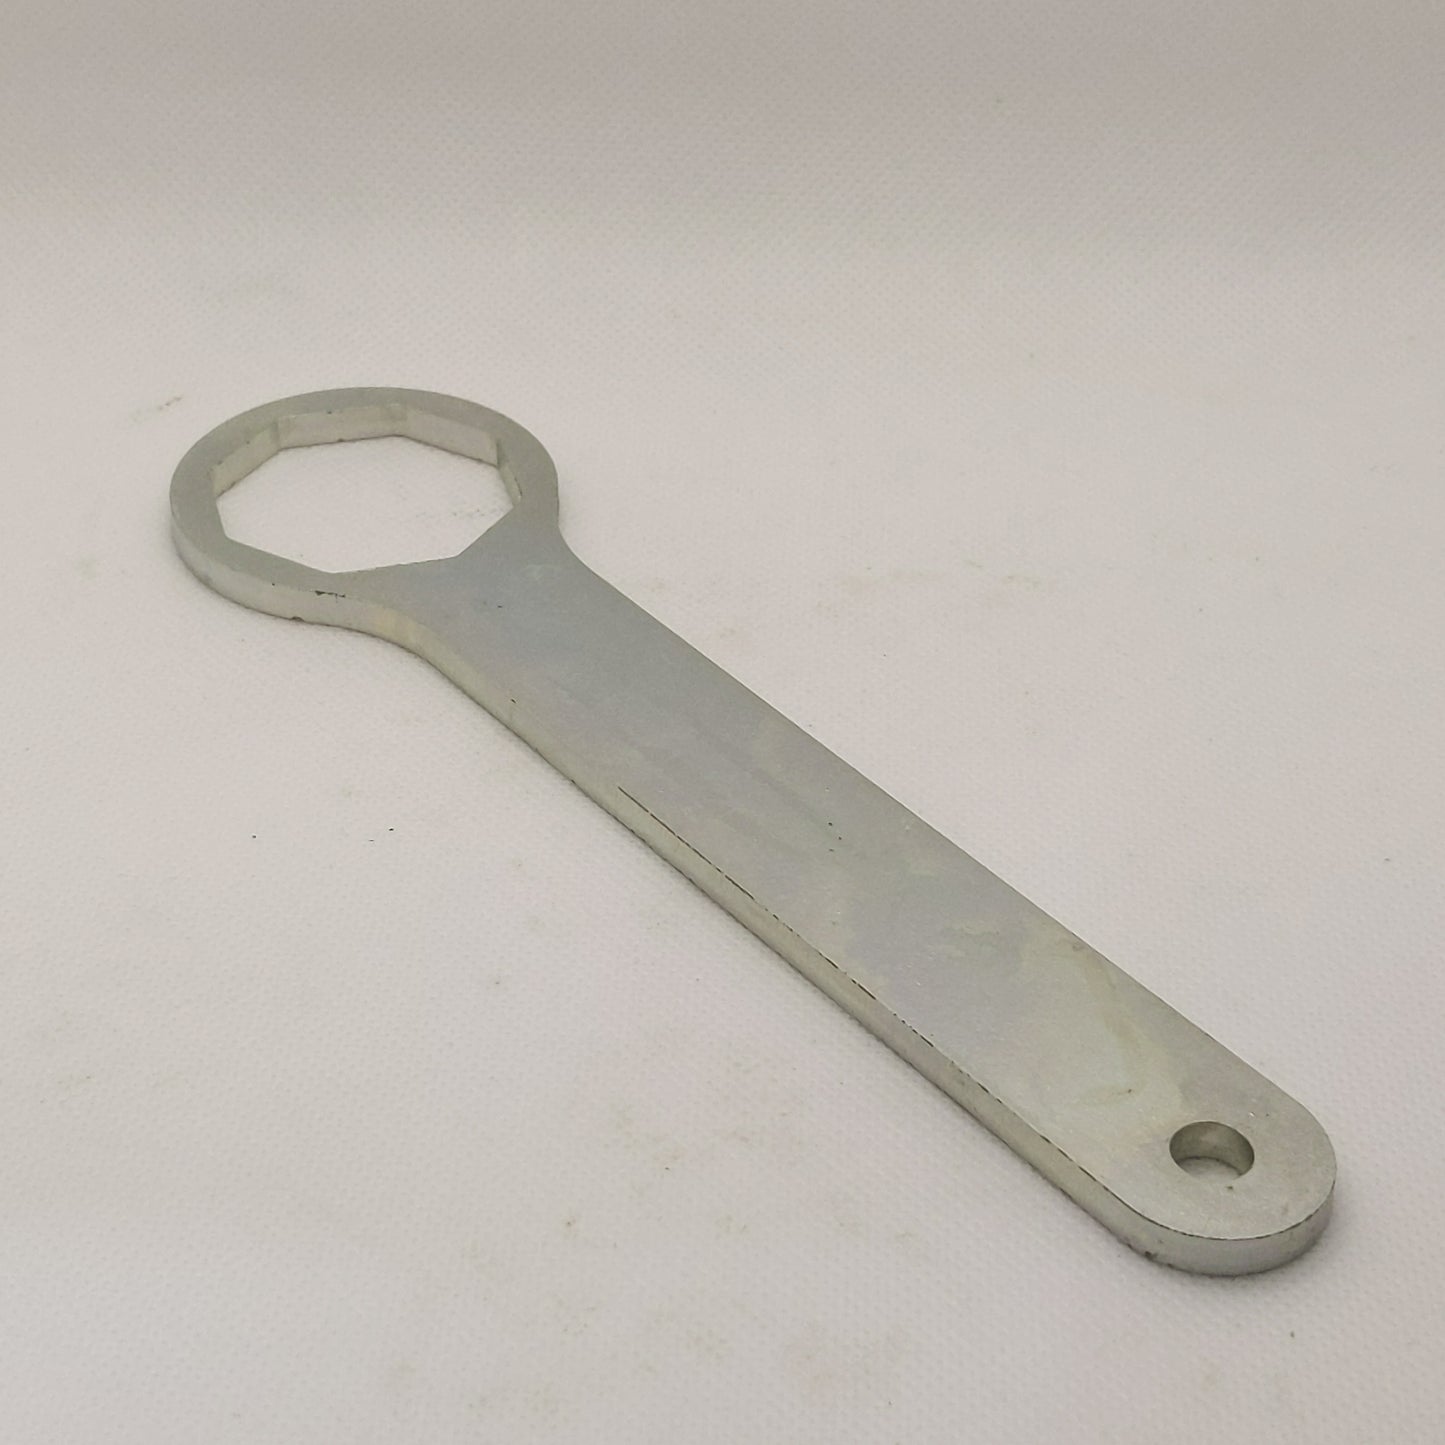 MCMUTL37 - TOOL - 37MM FORK CAP WRENCH